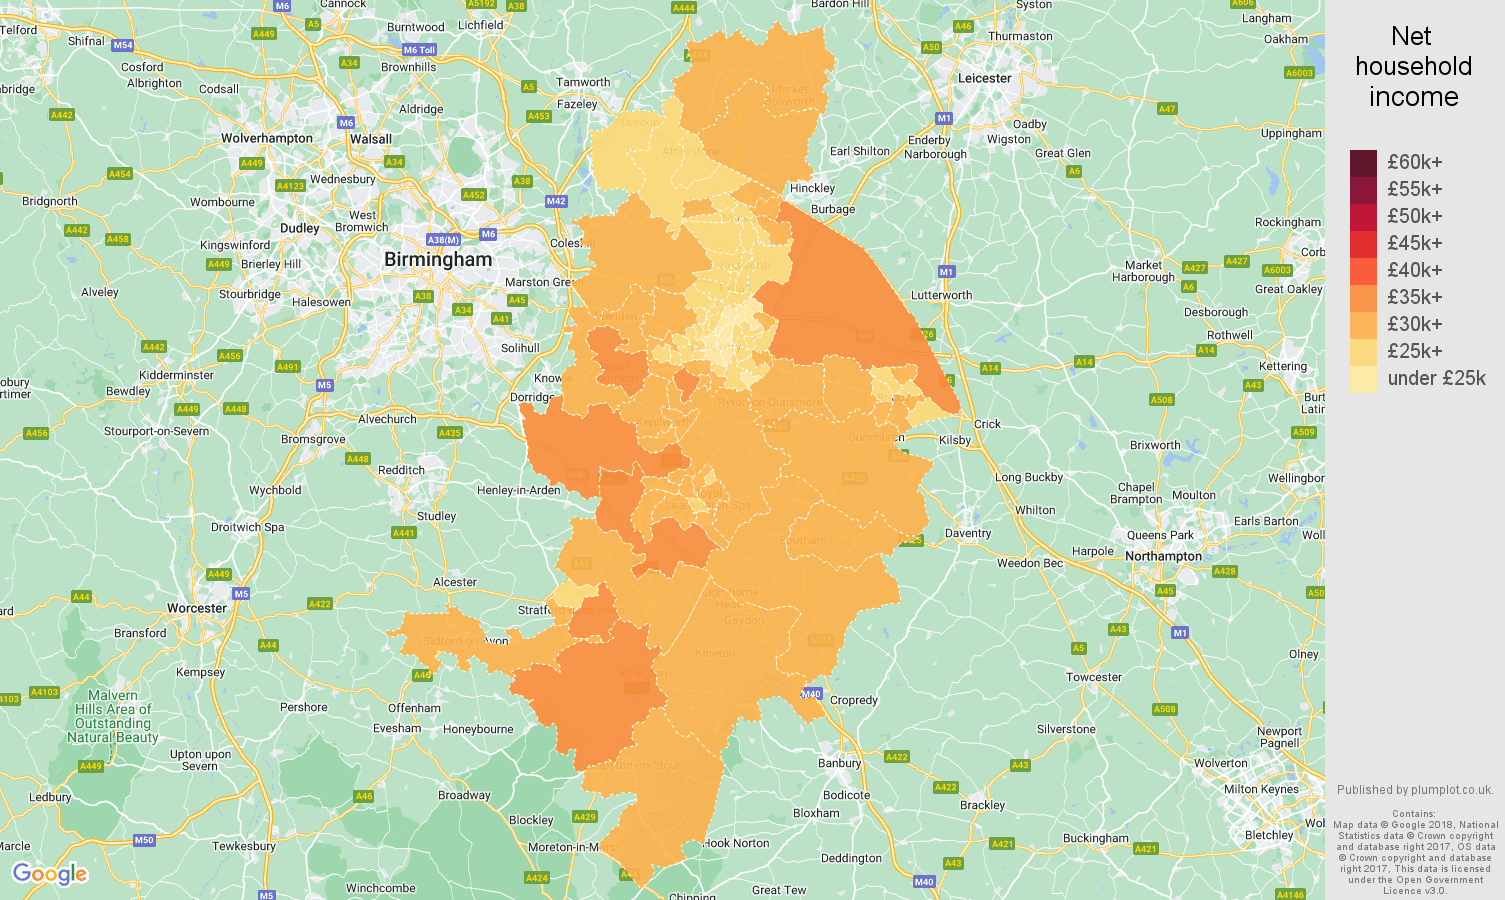 Coventry net household income map